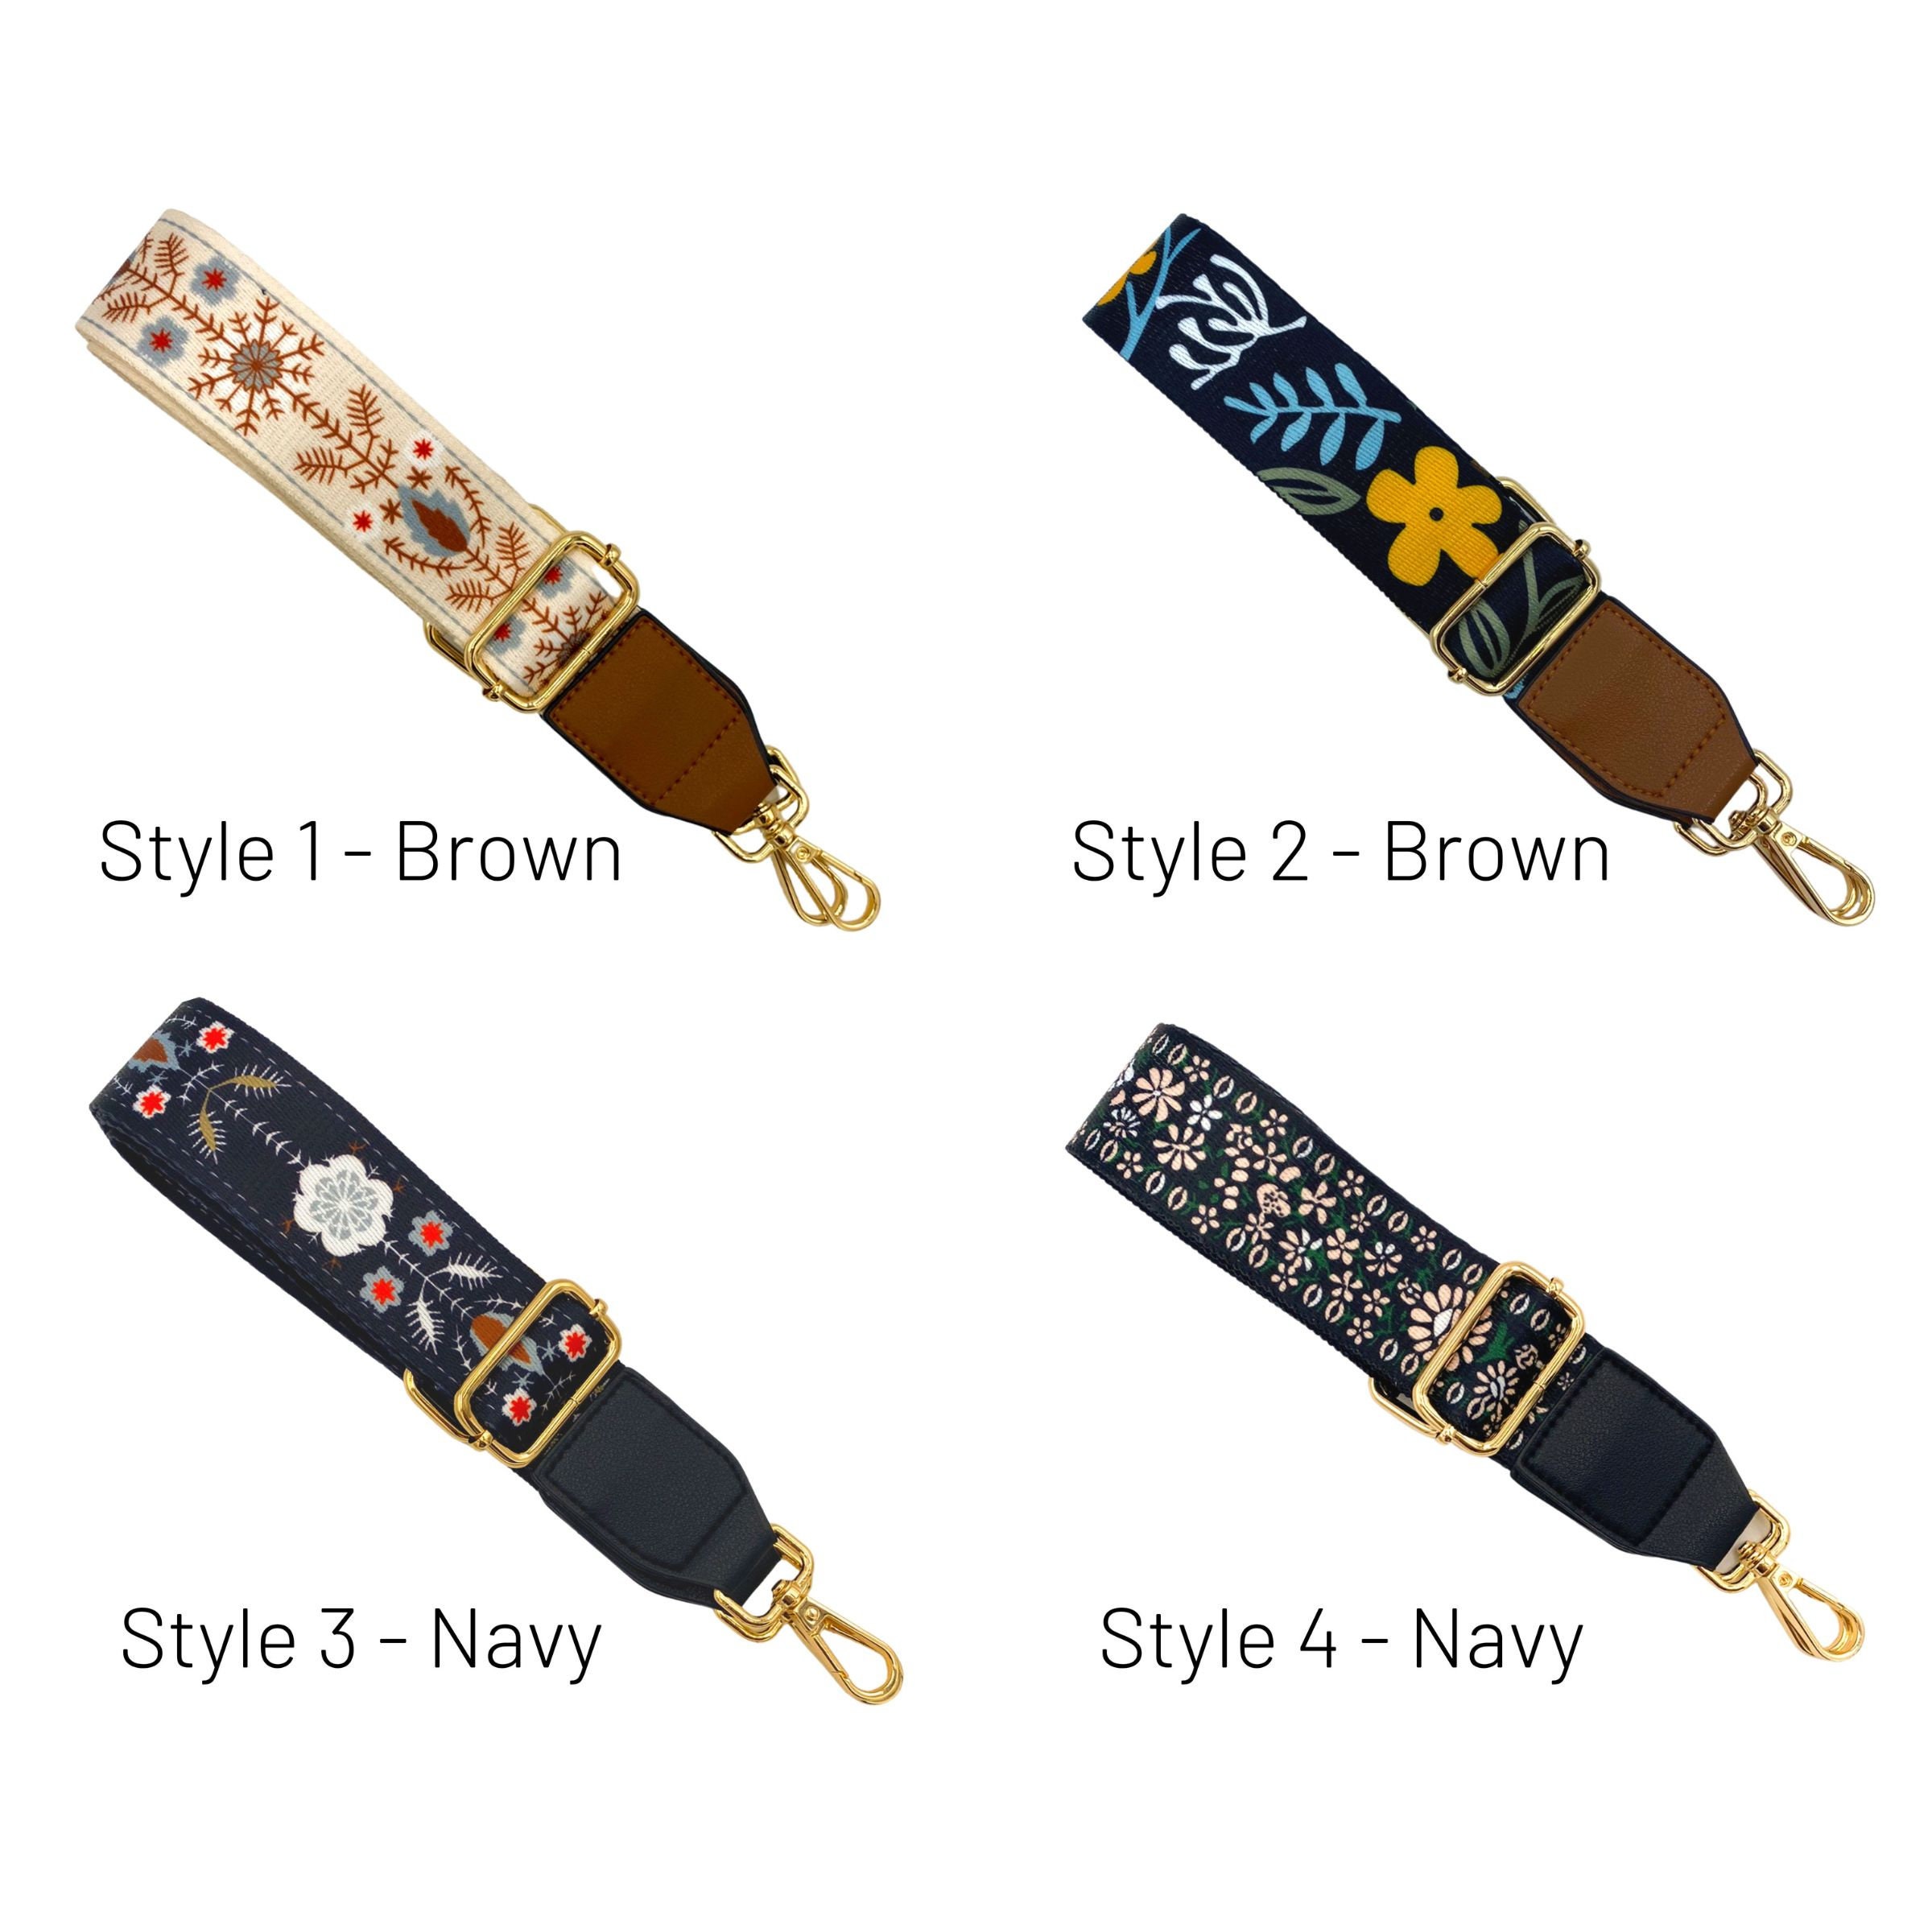 Clearance-1 1/2 Inch Wide Handbag Strap Guitar Strap Purse Strap Gold  Hardware Adjusts to 51 Length STYLE 9 